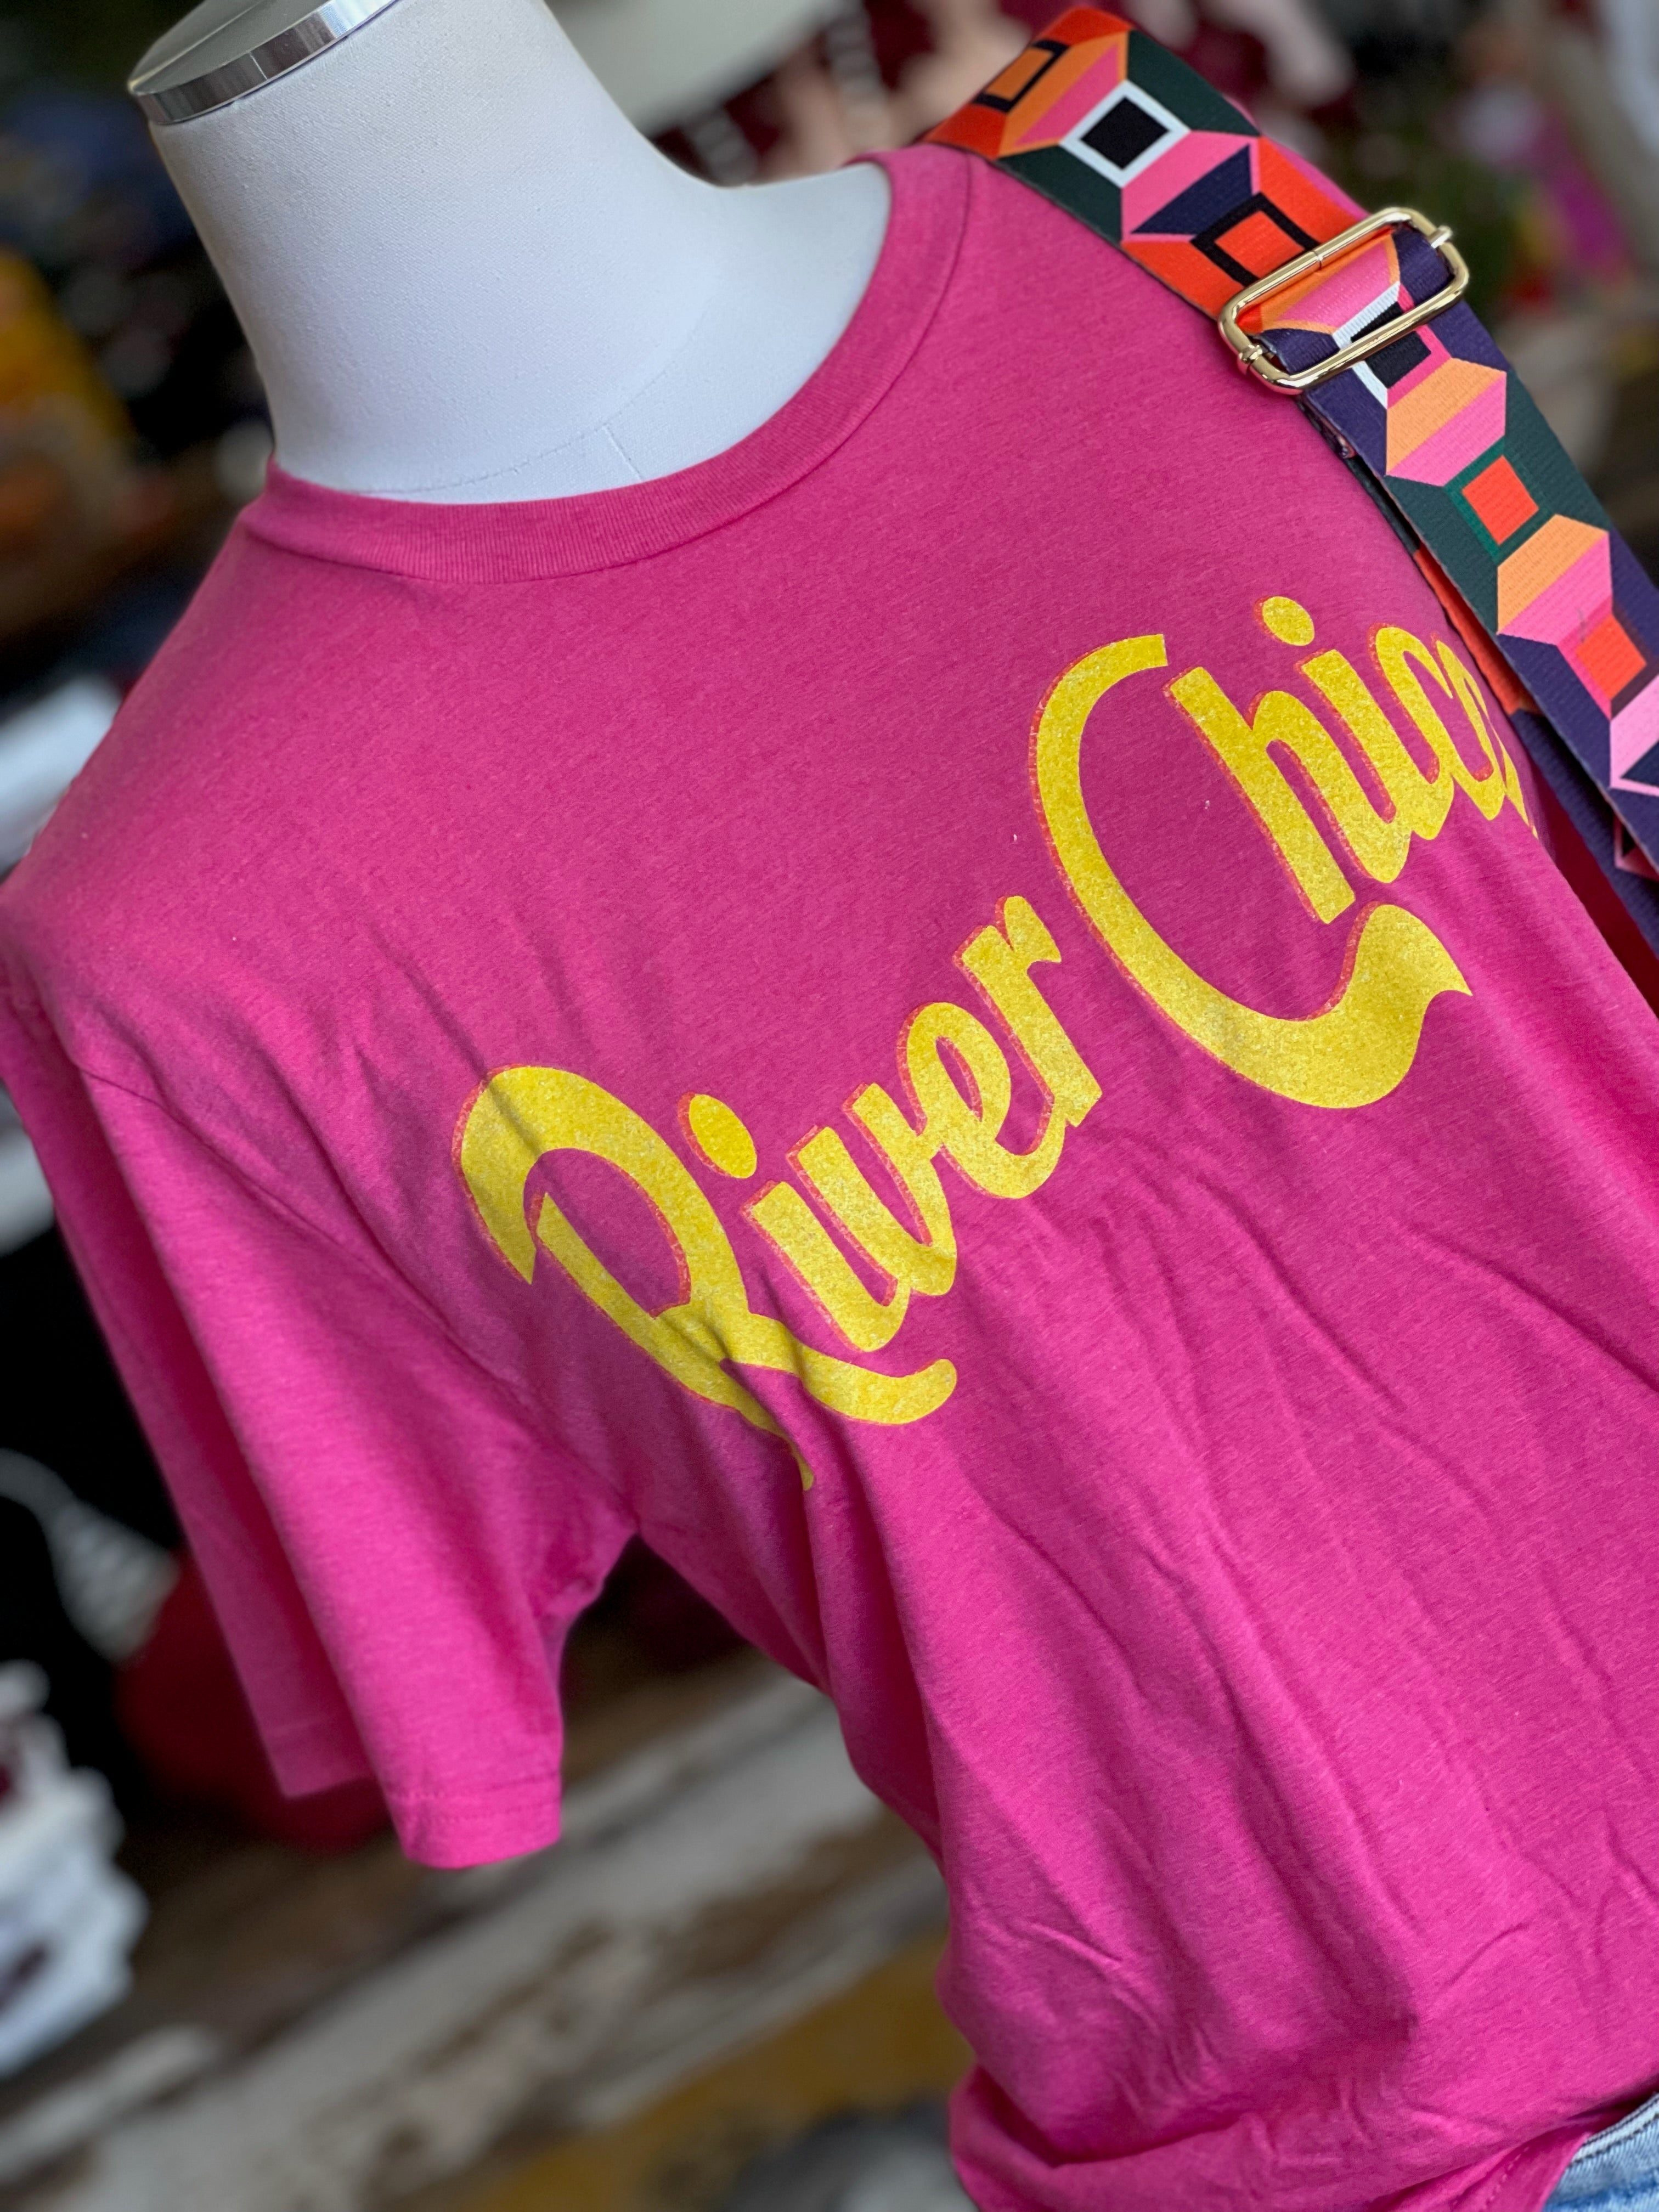 River Chica Tee